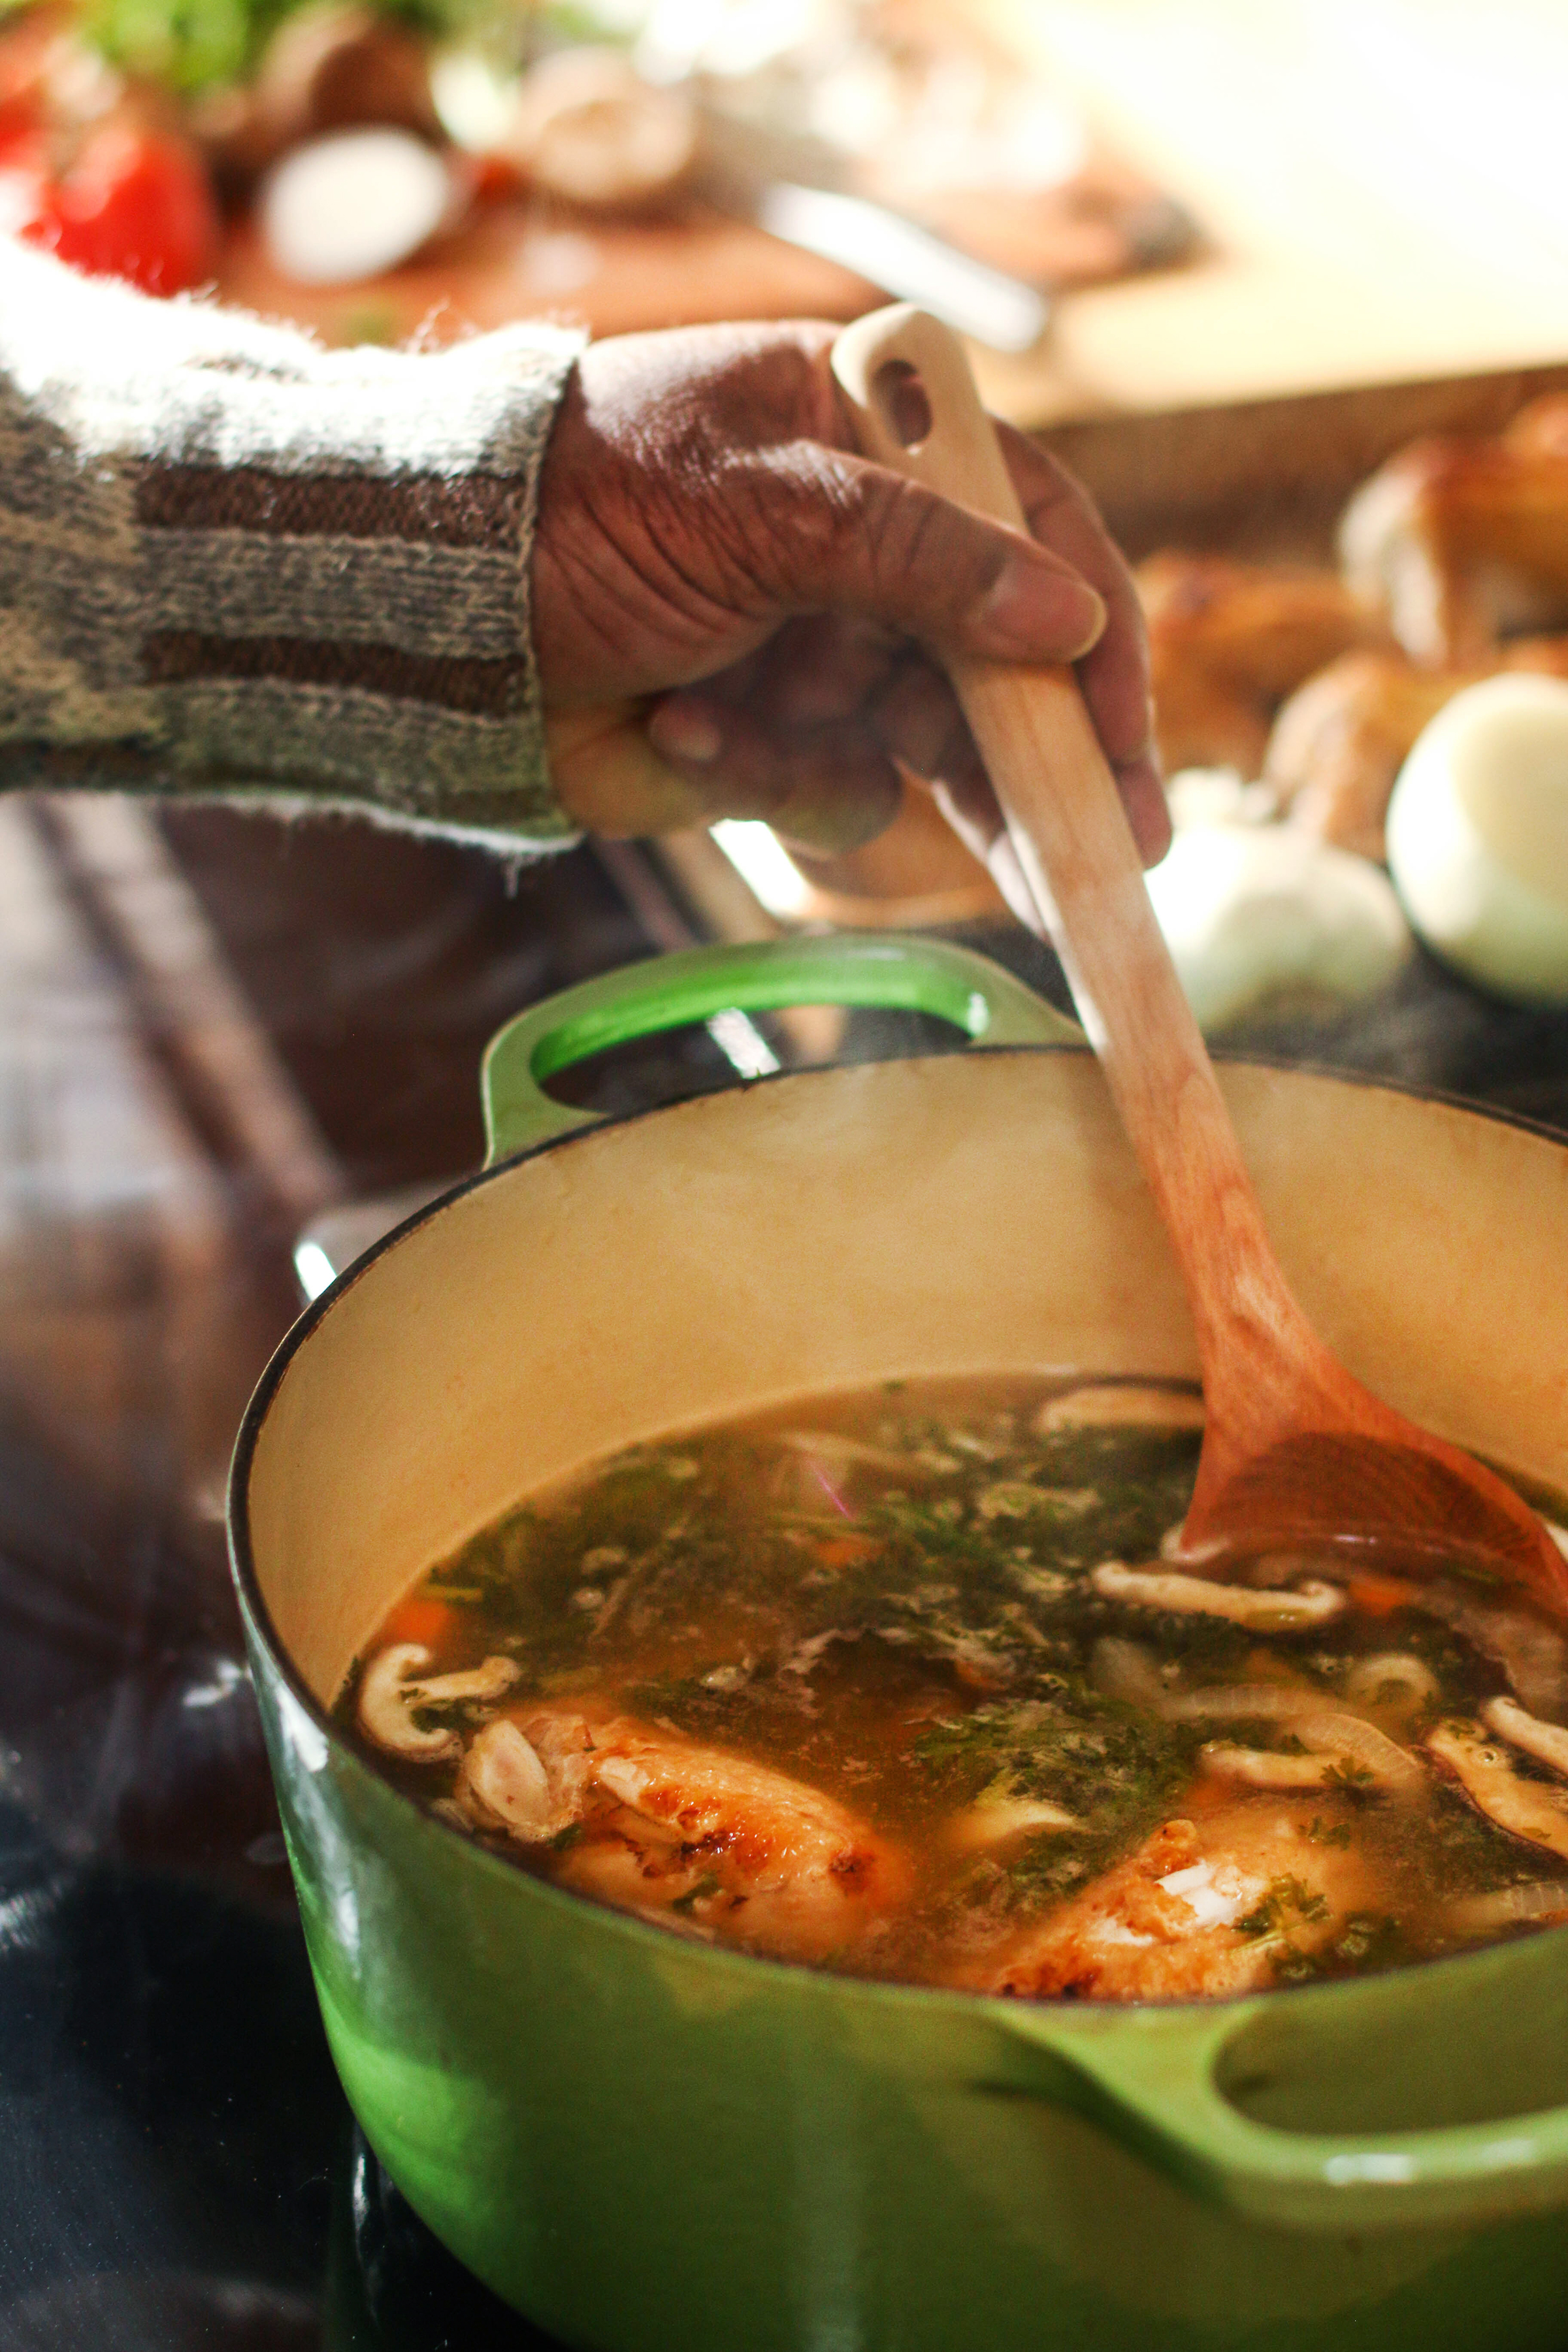 black-person-wearing-cozy-sweater-standing-over-stove-stirring-soup-with-herbs-mushrooms-vegetables-in-green-enamel-dutch-oven-using-wooden-spoon